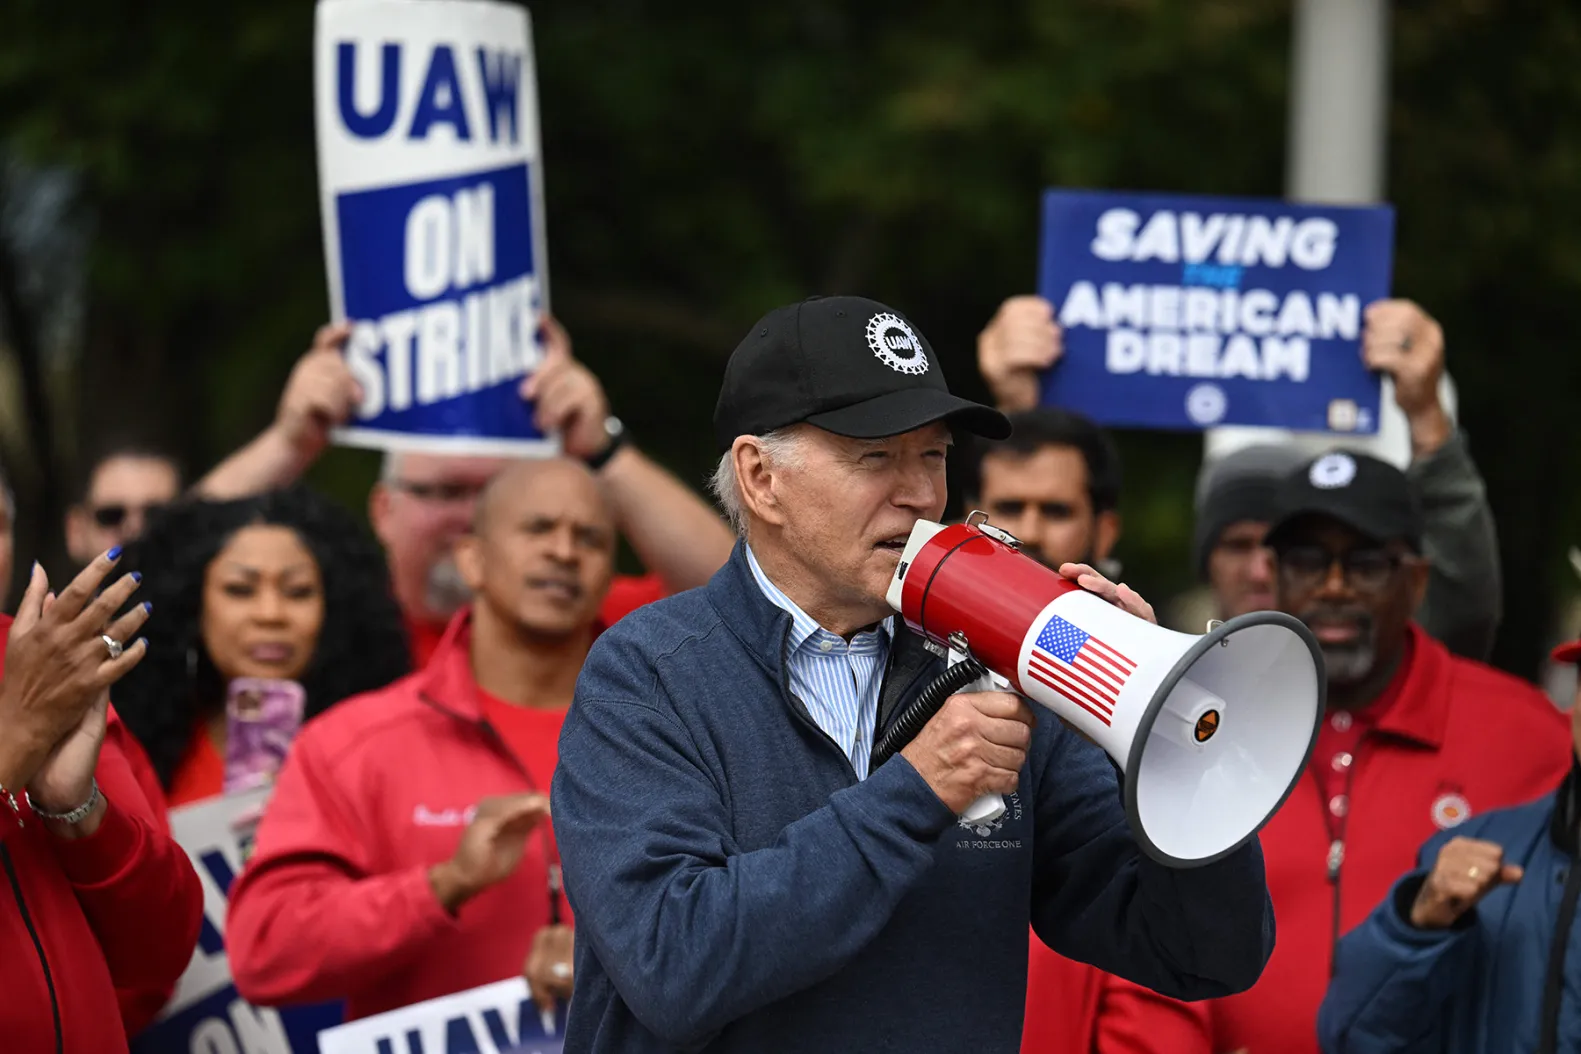 Biden capitalizes on UAW endorsement while visiting Michigan (Credits: Rolling Stone)